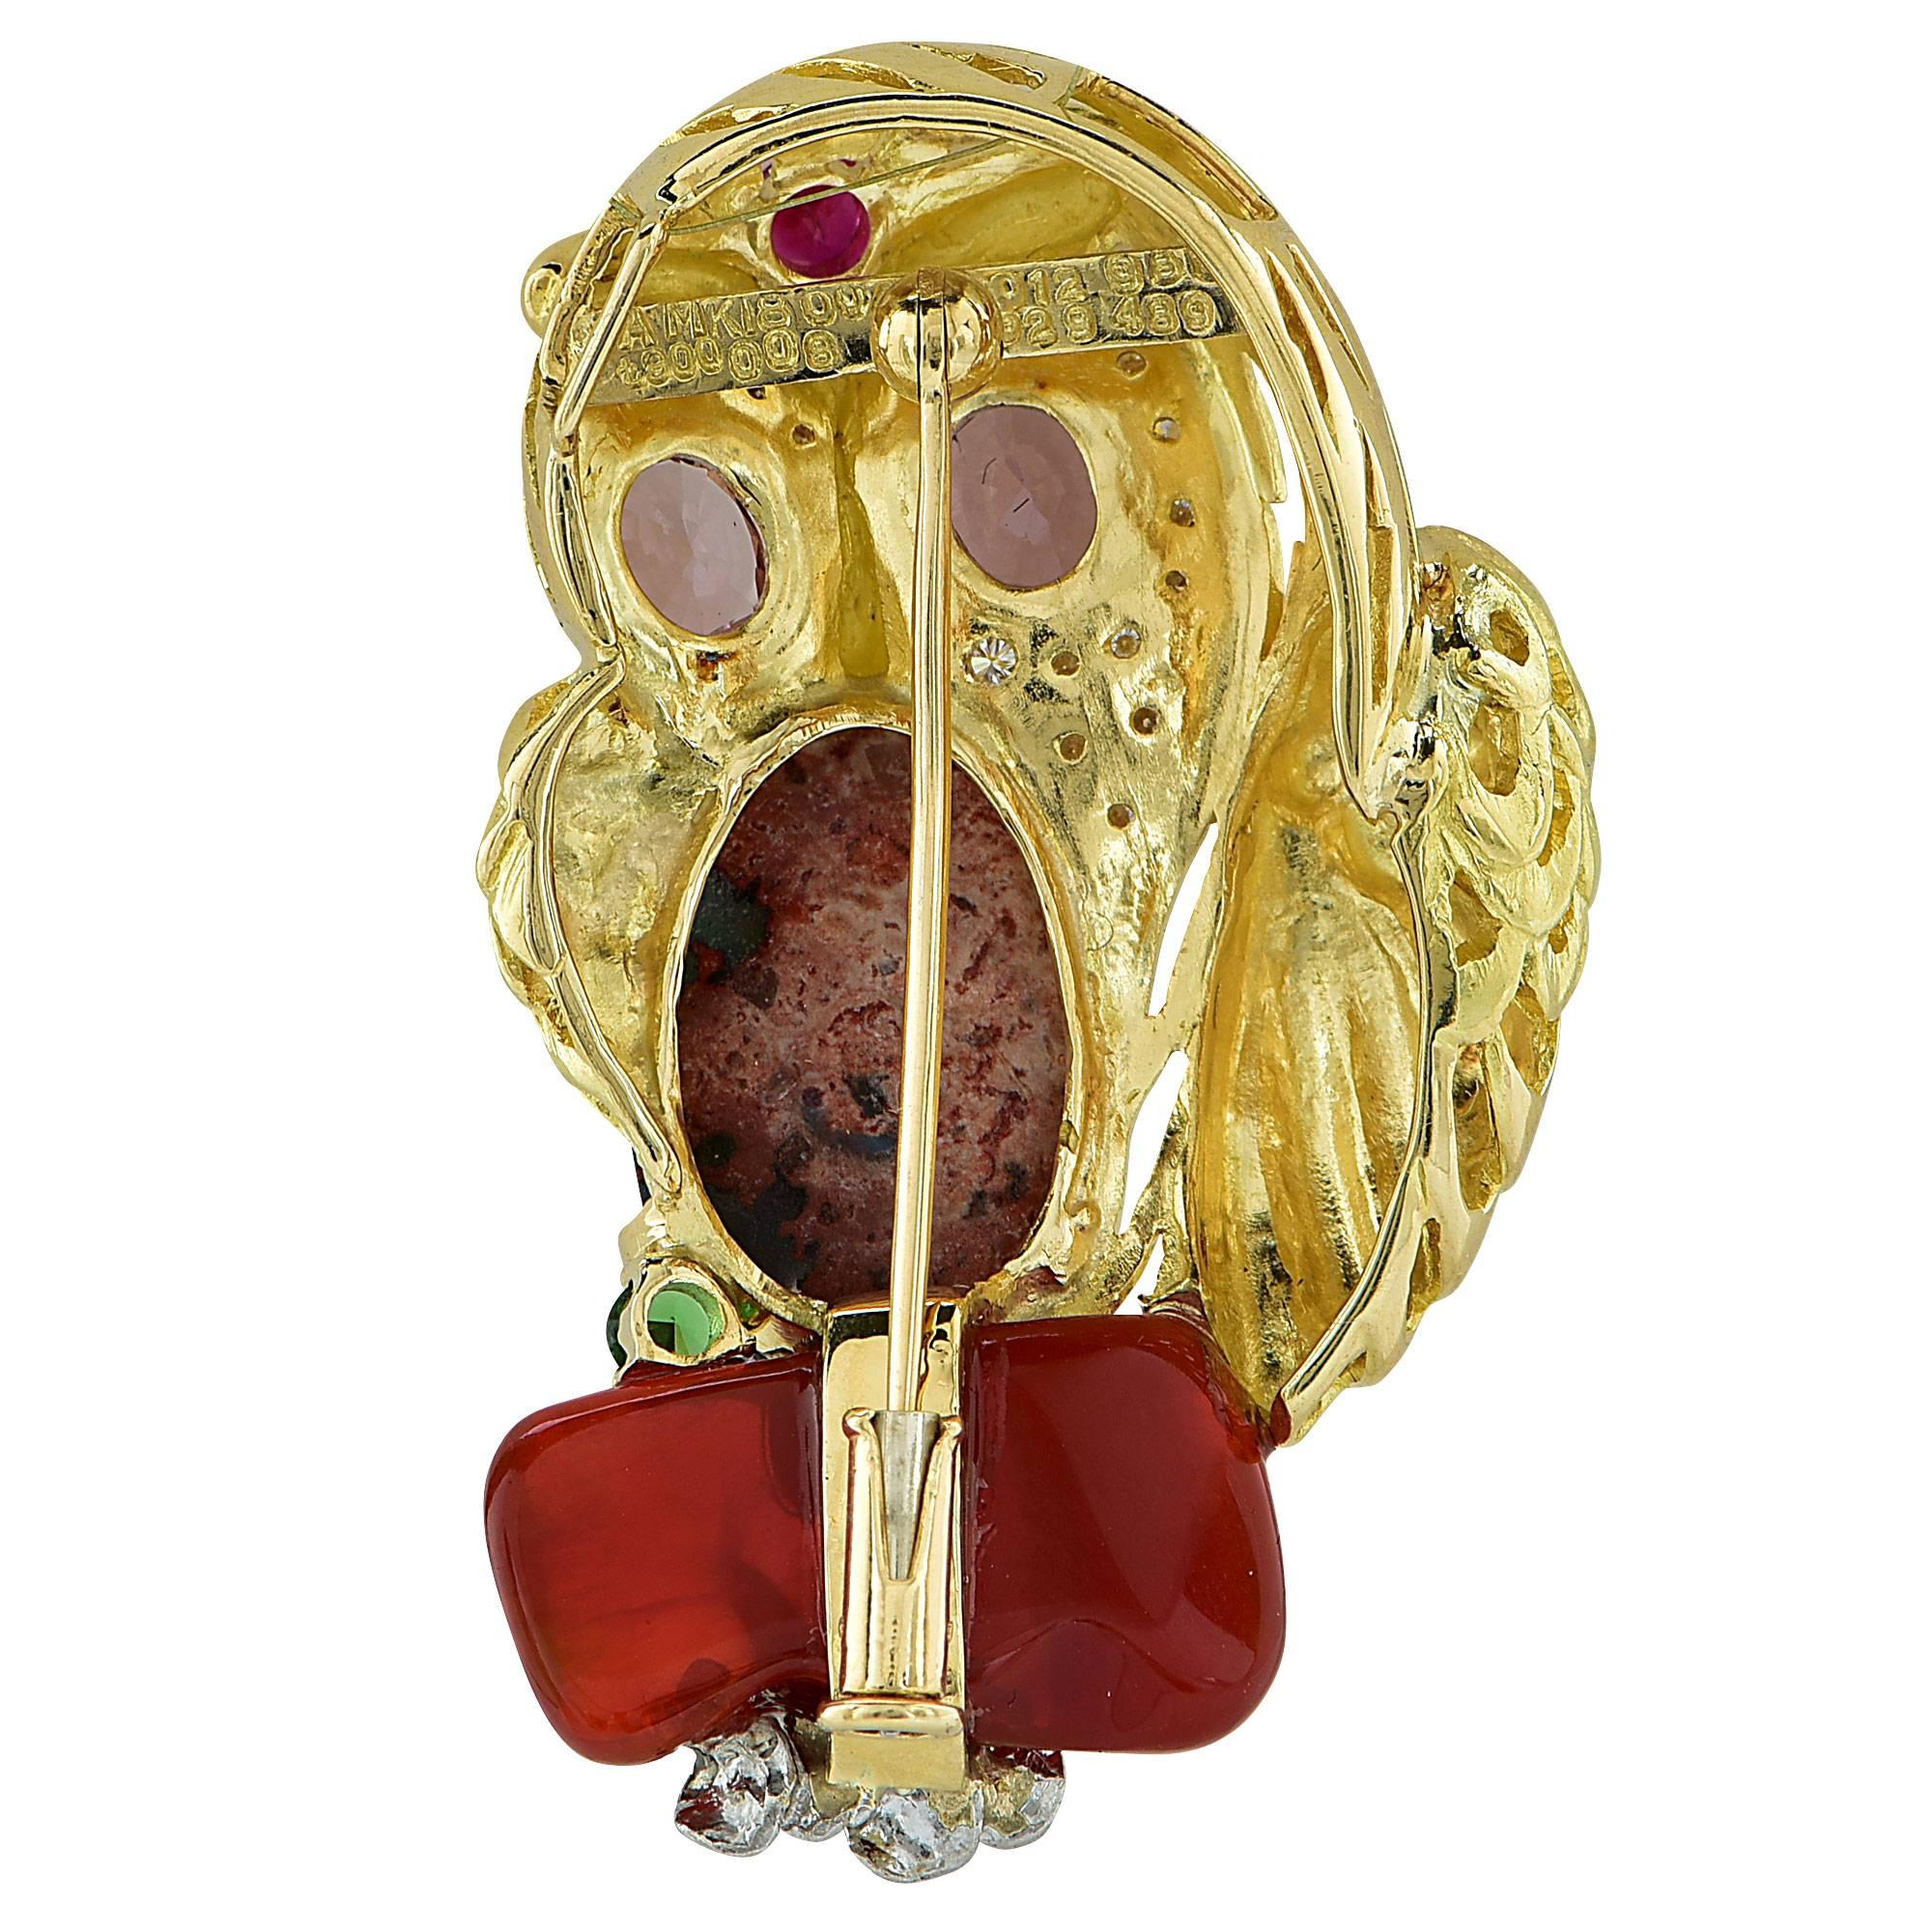 Vintage 18k yellow gold owl brooch featuring opal, diamonds and quartz.

Metal weight: 13.06 grams

This beautiful brooch is accompanied by a retail appraisal performed by a Graduate Gemologist.